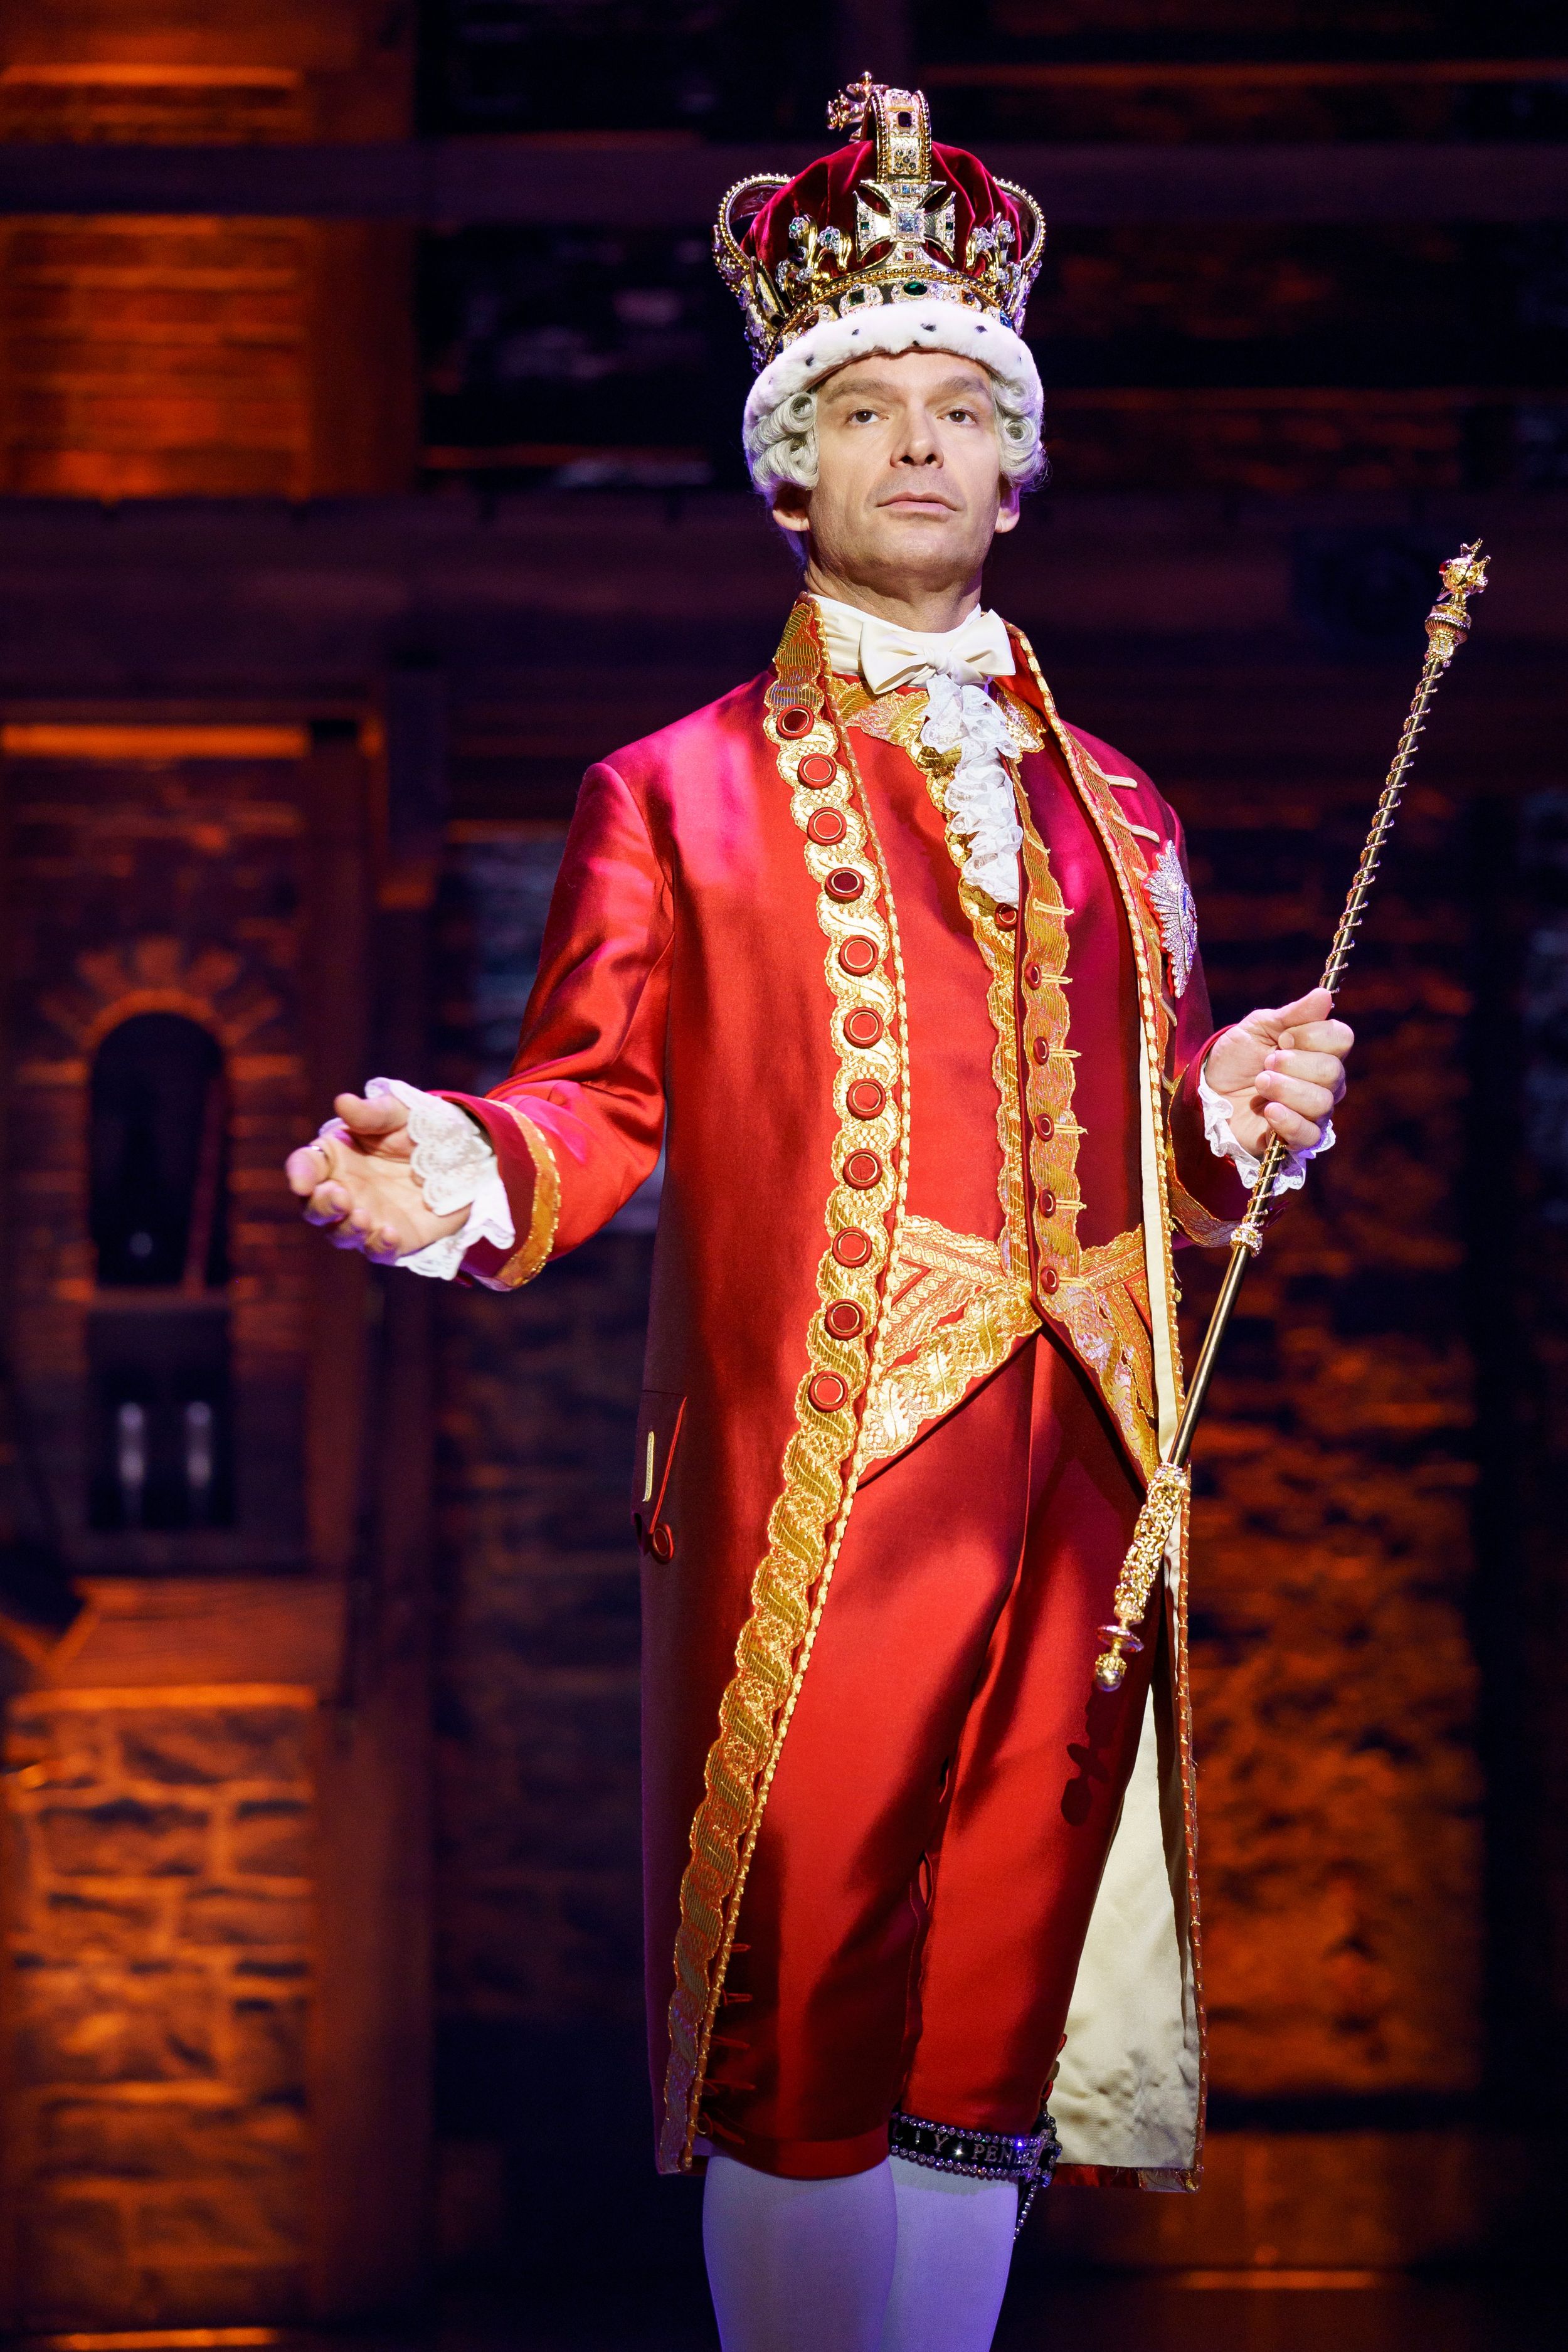 You'll be back': In playing King George III in 'Hamilton,' Rick